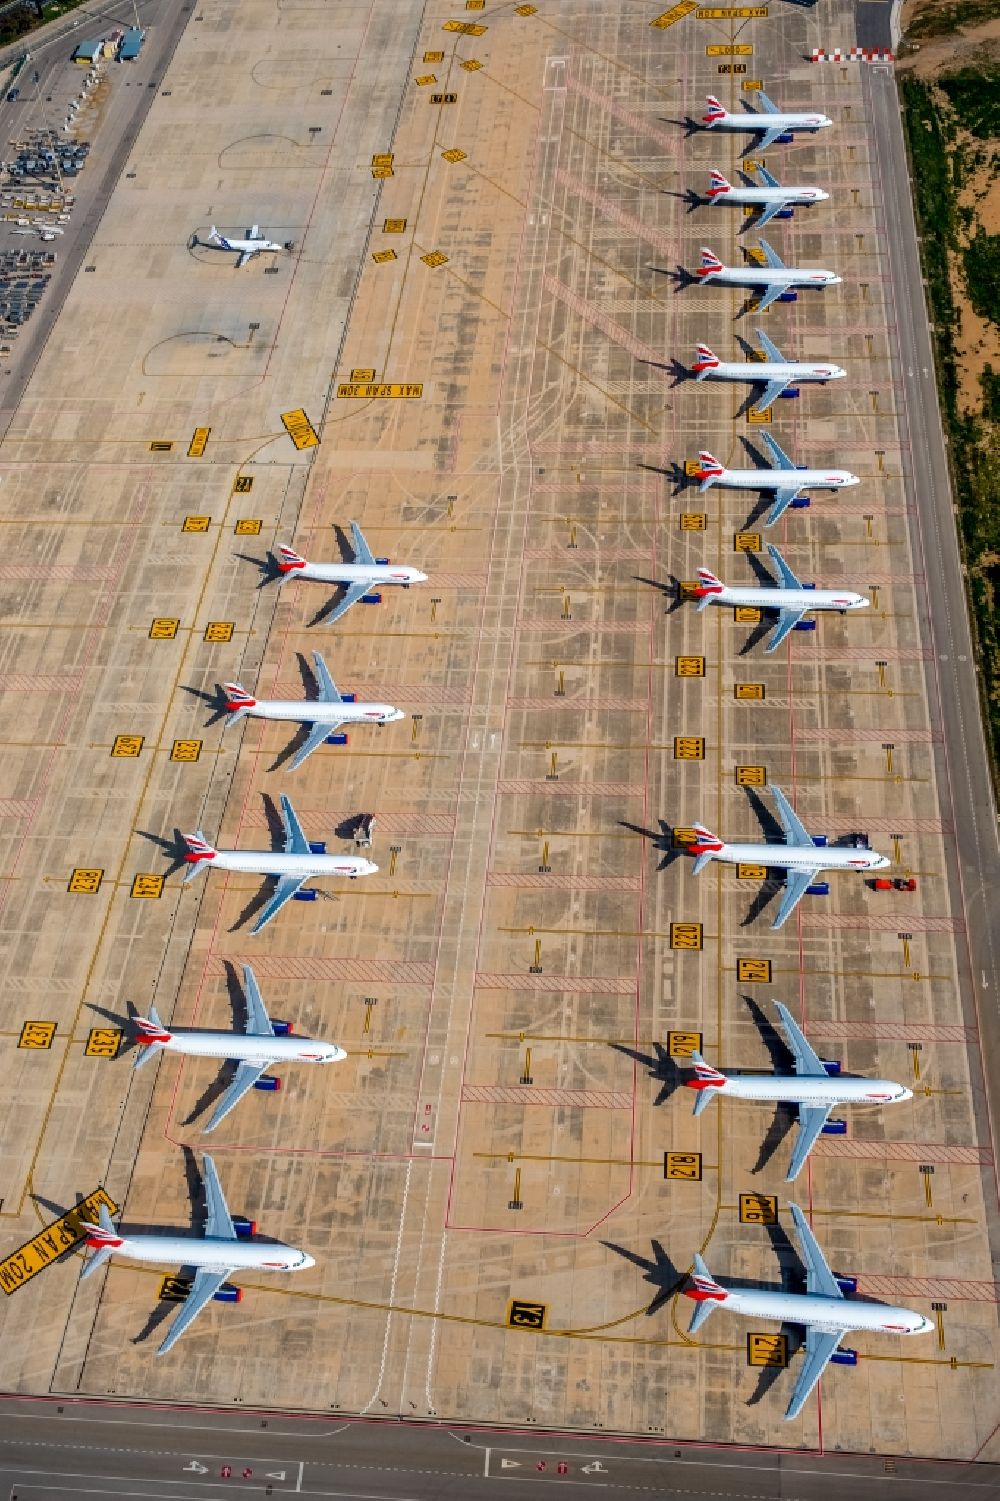 Palma from the bird's eye view: Passenger airplane Airbus Airbus A320-232 of airline Britisch Airways in pandemic parking position - parking area at the airport in the district Llevant de Palma District in Palma in Islas Baleares, Spain